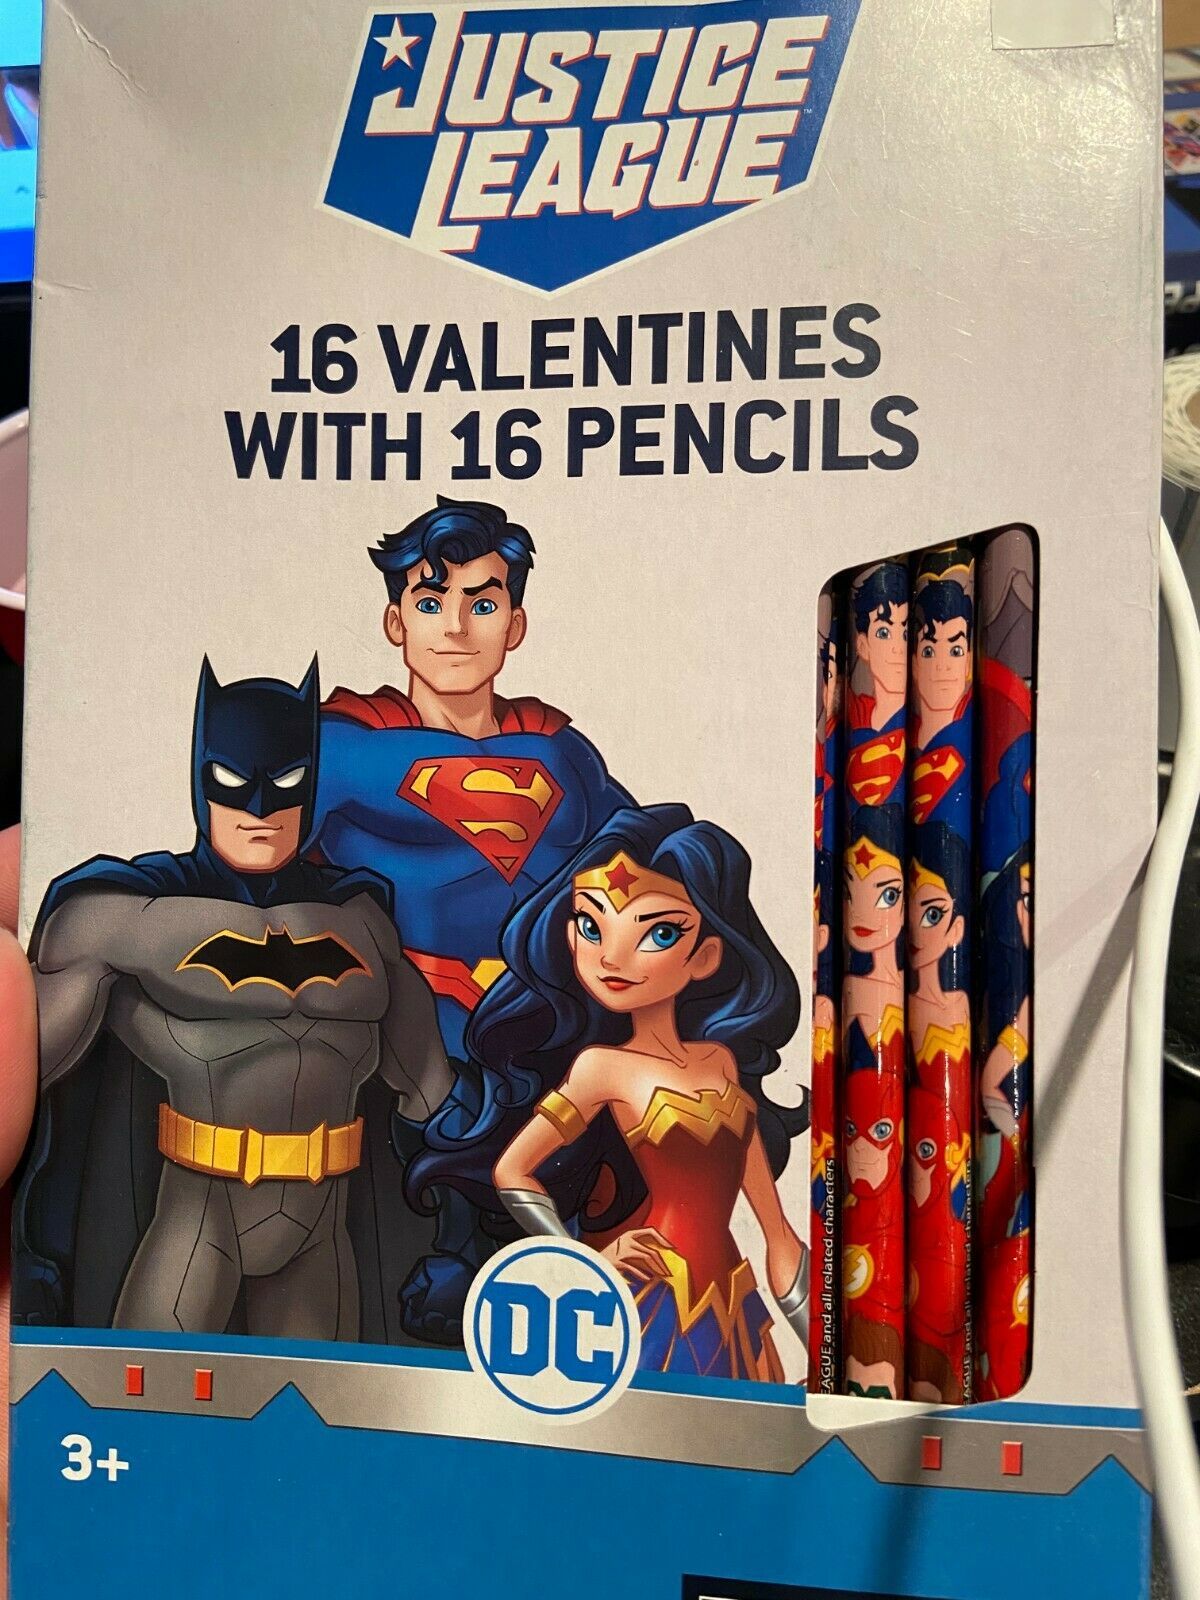 Primary image for Justice League 16 Valentines with 16 Pencils *NEW* q1